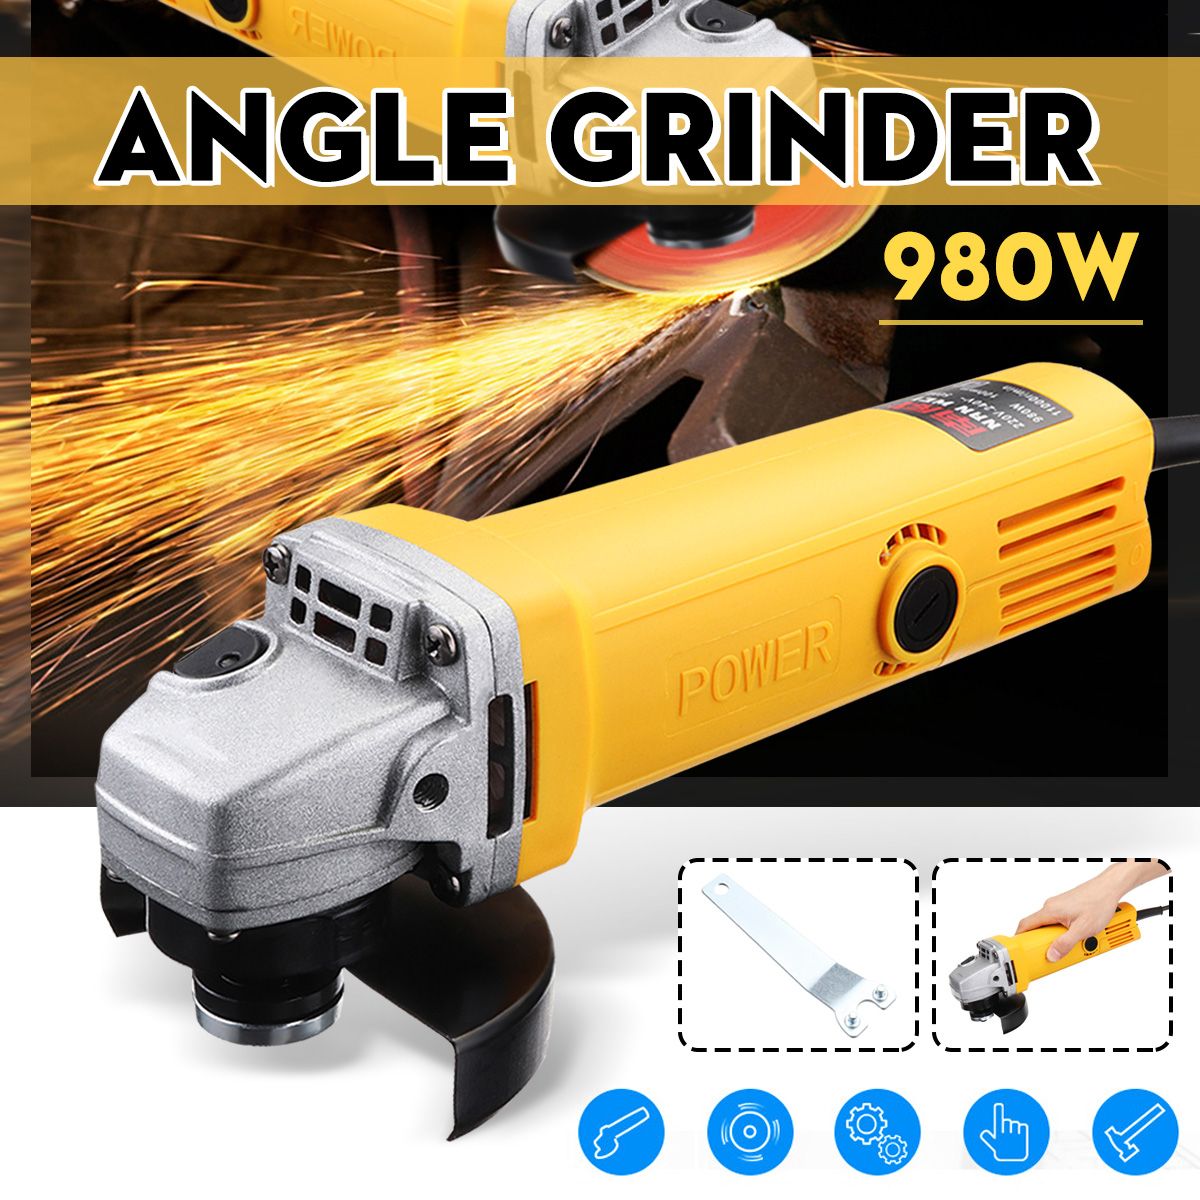 220V50Hz-980W-11000rmin-Angle-Grinder-Electric-Angle-Grinding-Cutting-Power-Tools-100mm-Diameter-1414378